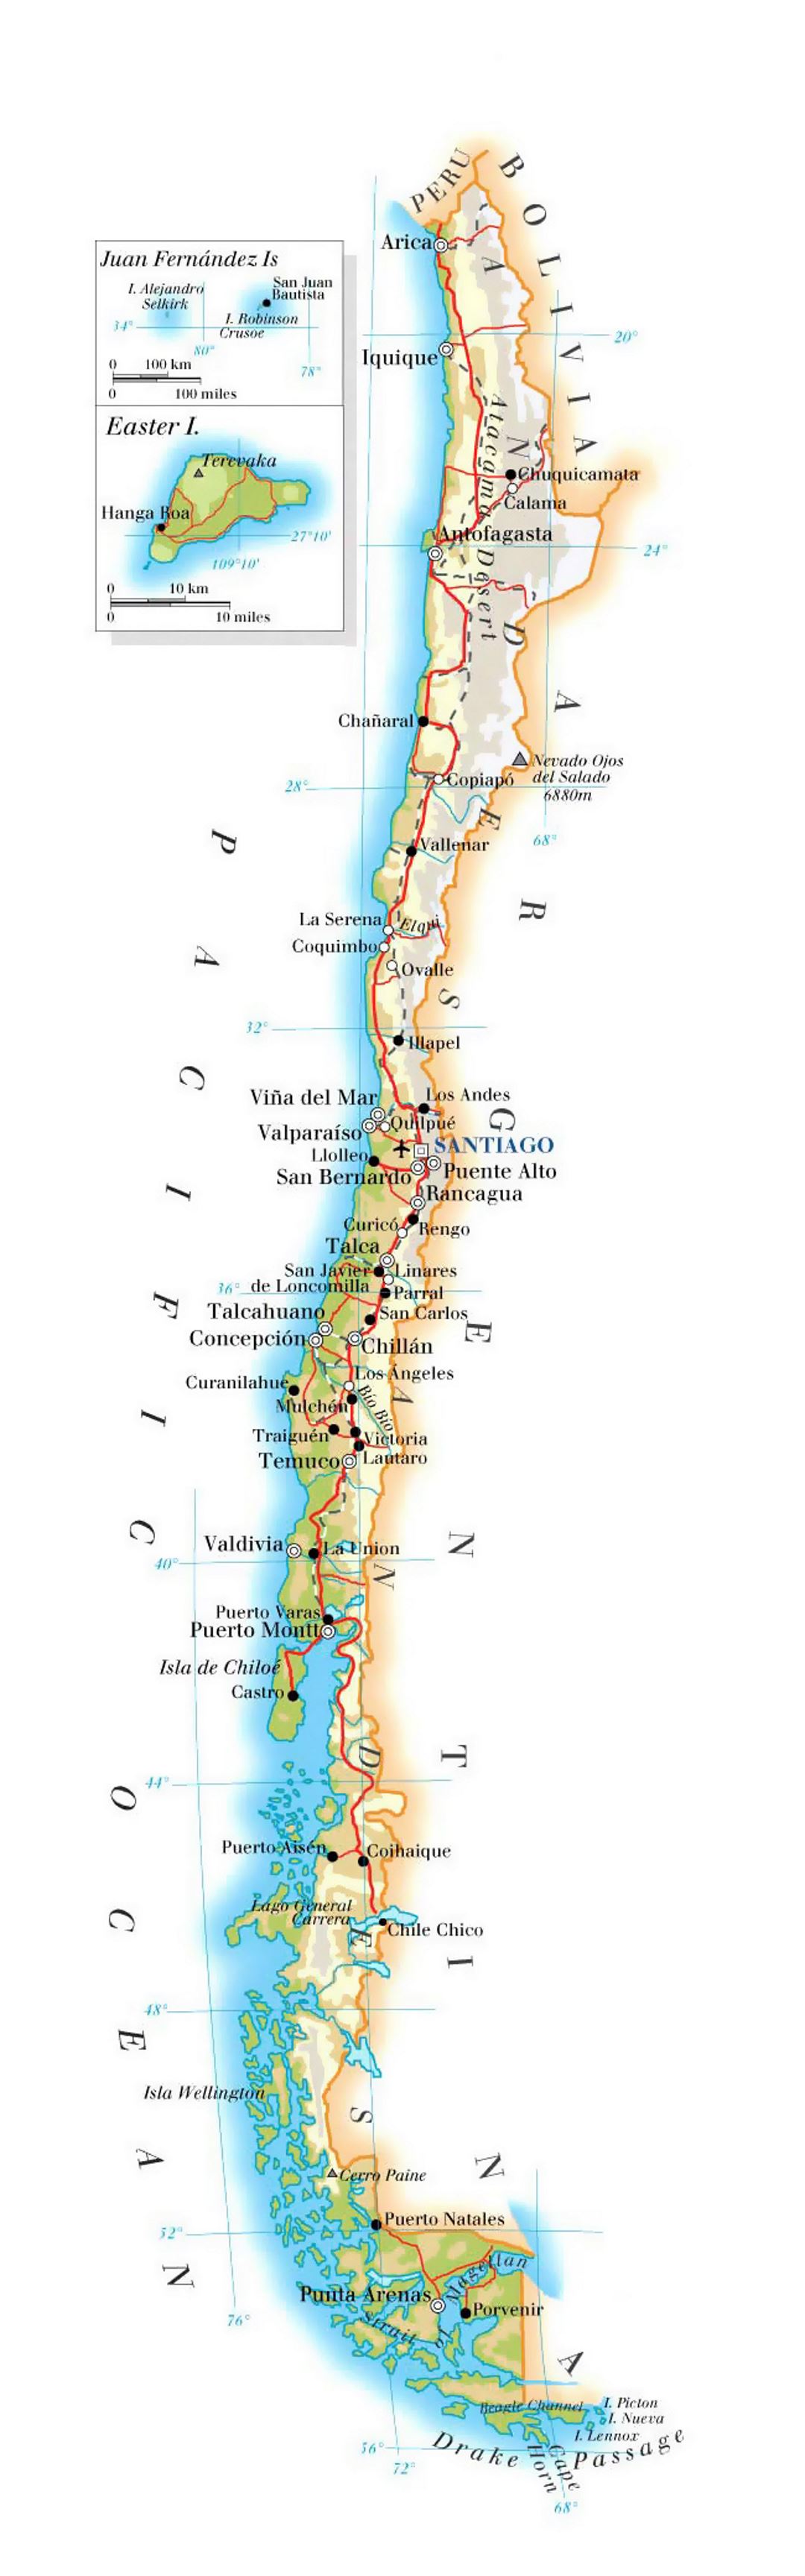 Detailed elevation map of Chile with roads, cities and airports